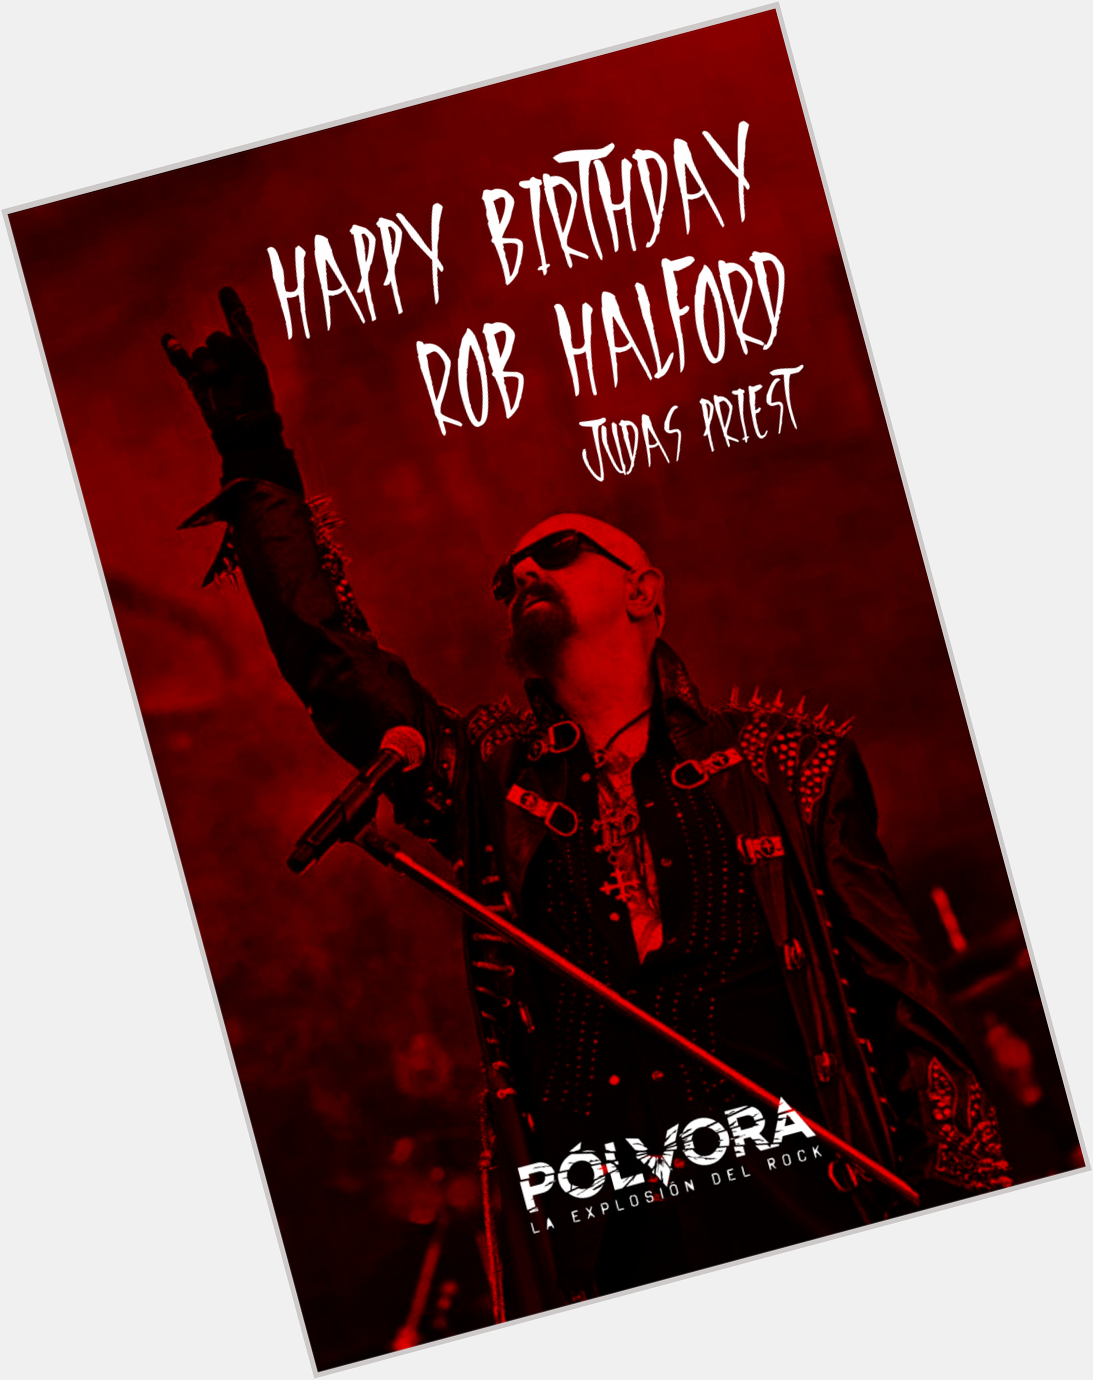 Happy birthday to one of the most powerful voices on the metal world: ROB HALFORD (  